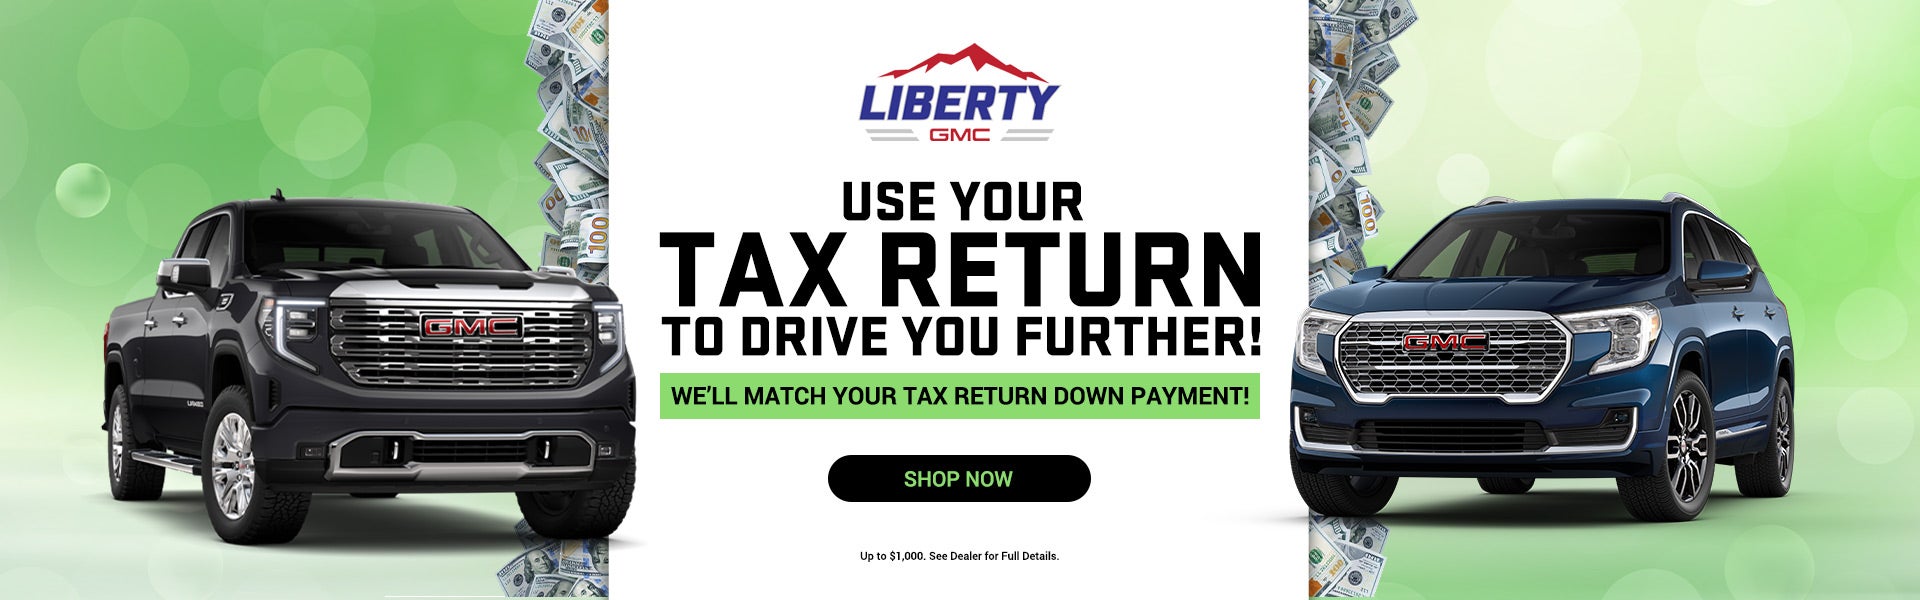 Use Your Tax Return 